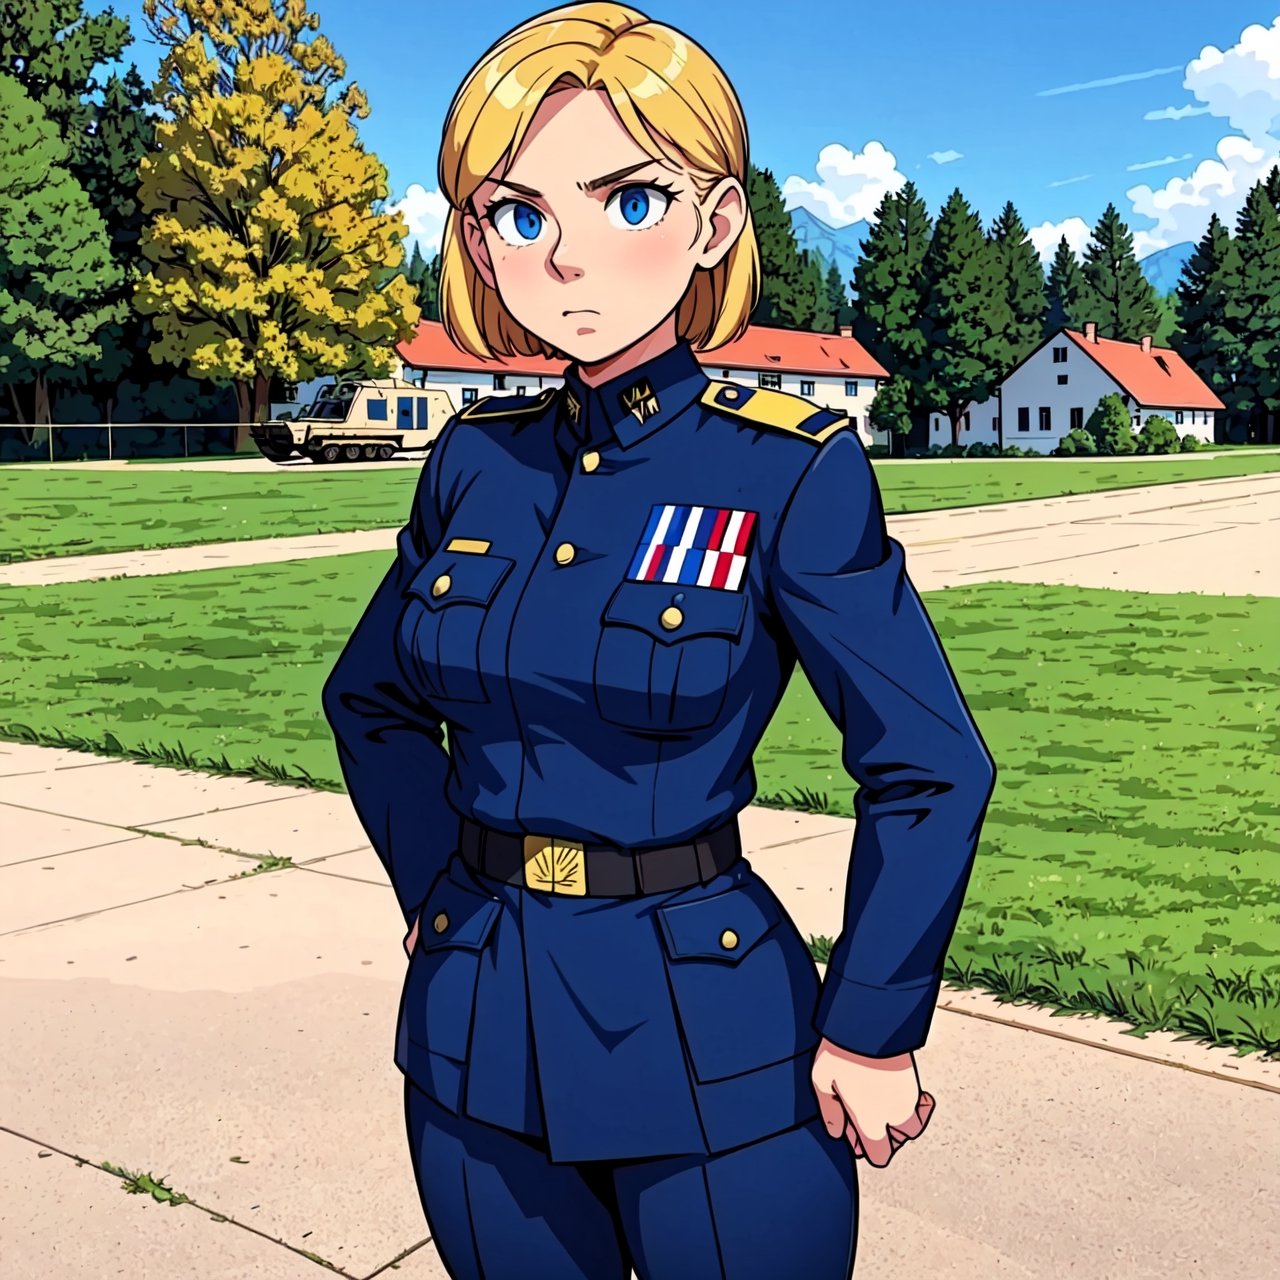 there is a girl in a uniform standing in front of a building, full uniform, set in ww2 germany, officers uniform, in black military uniform, in black uniform, inspired by Adolf Ulric Wertmüller, general uniform, uniform, fascist police, outfit: cop, full dress uniform, backdrop, wearing military uniform, military uniform, carl gustav, officer